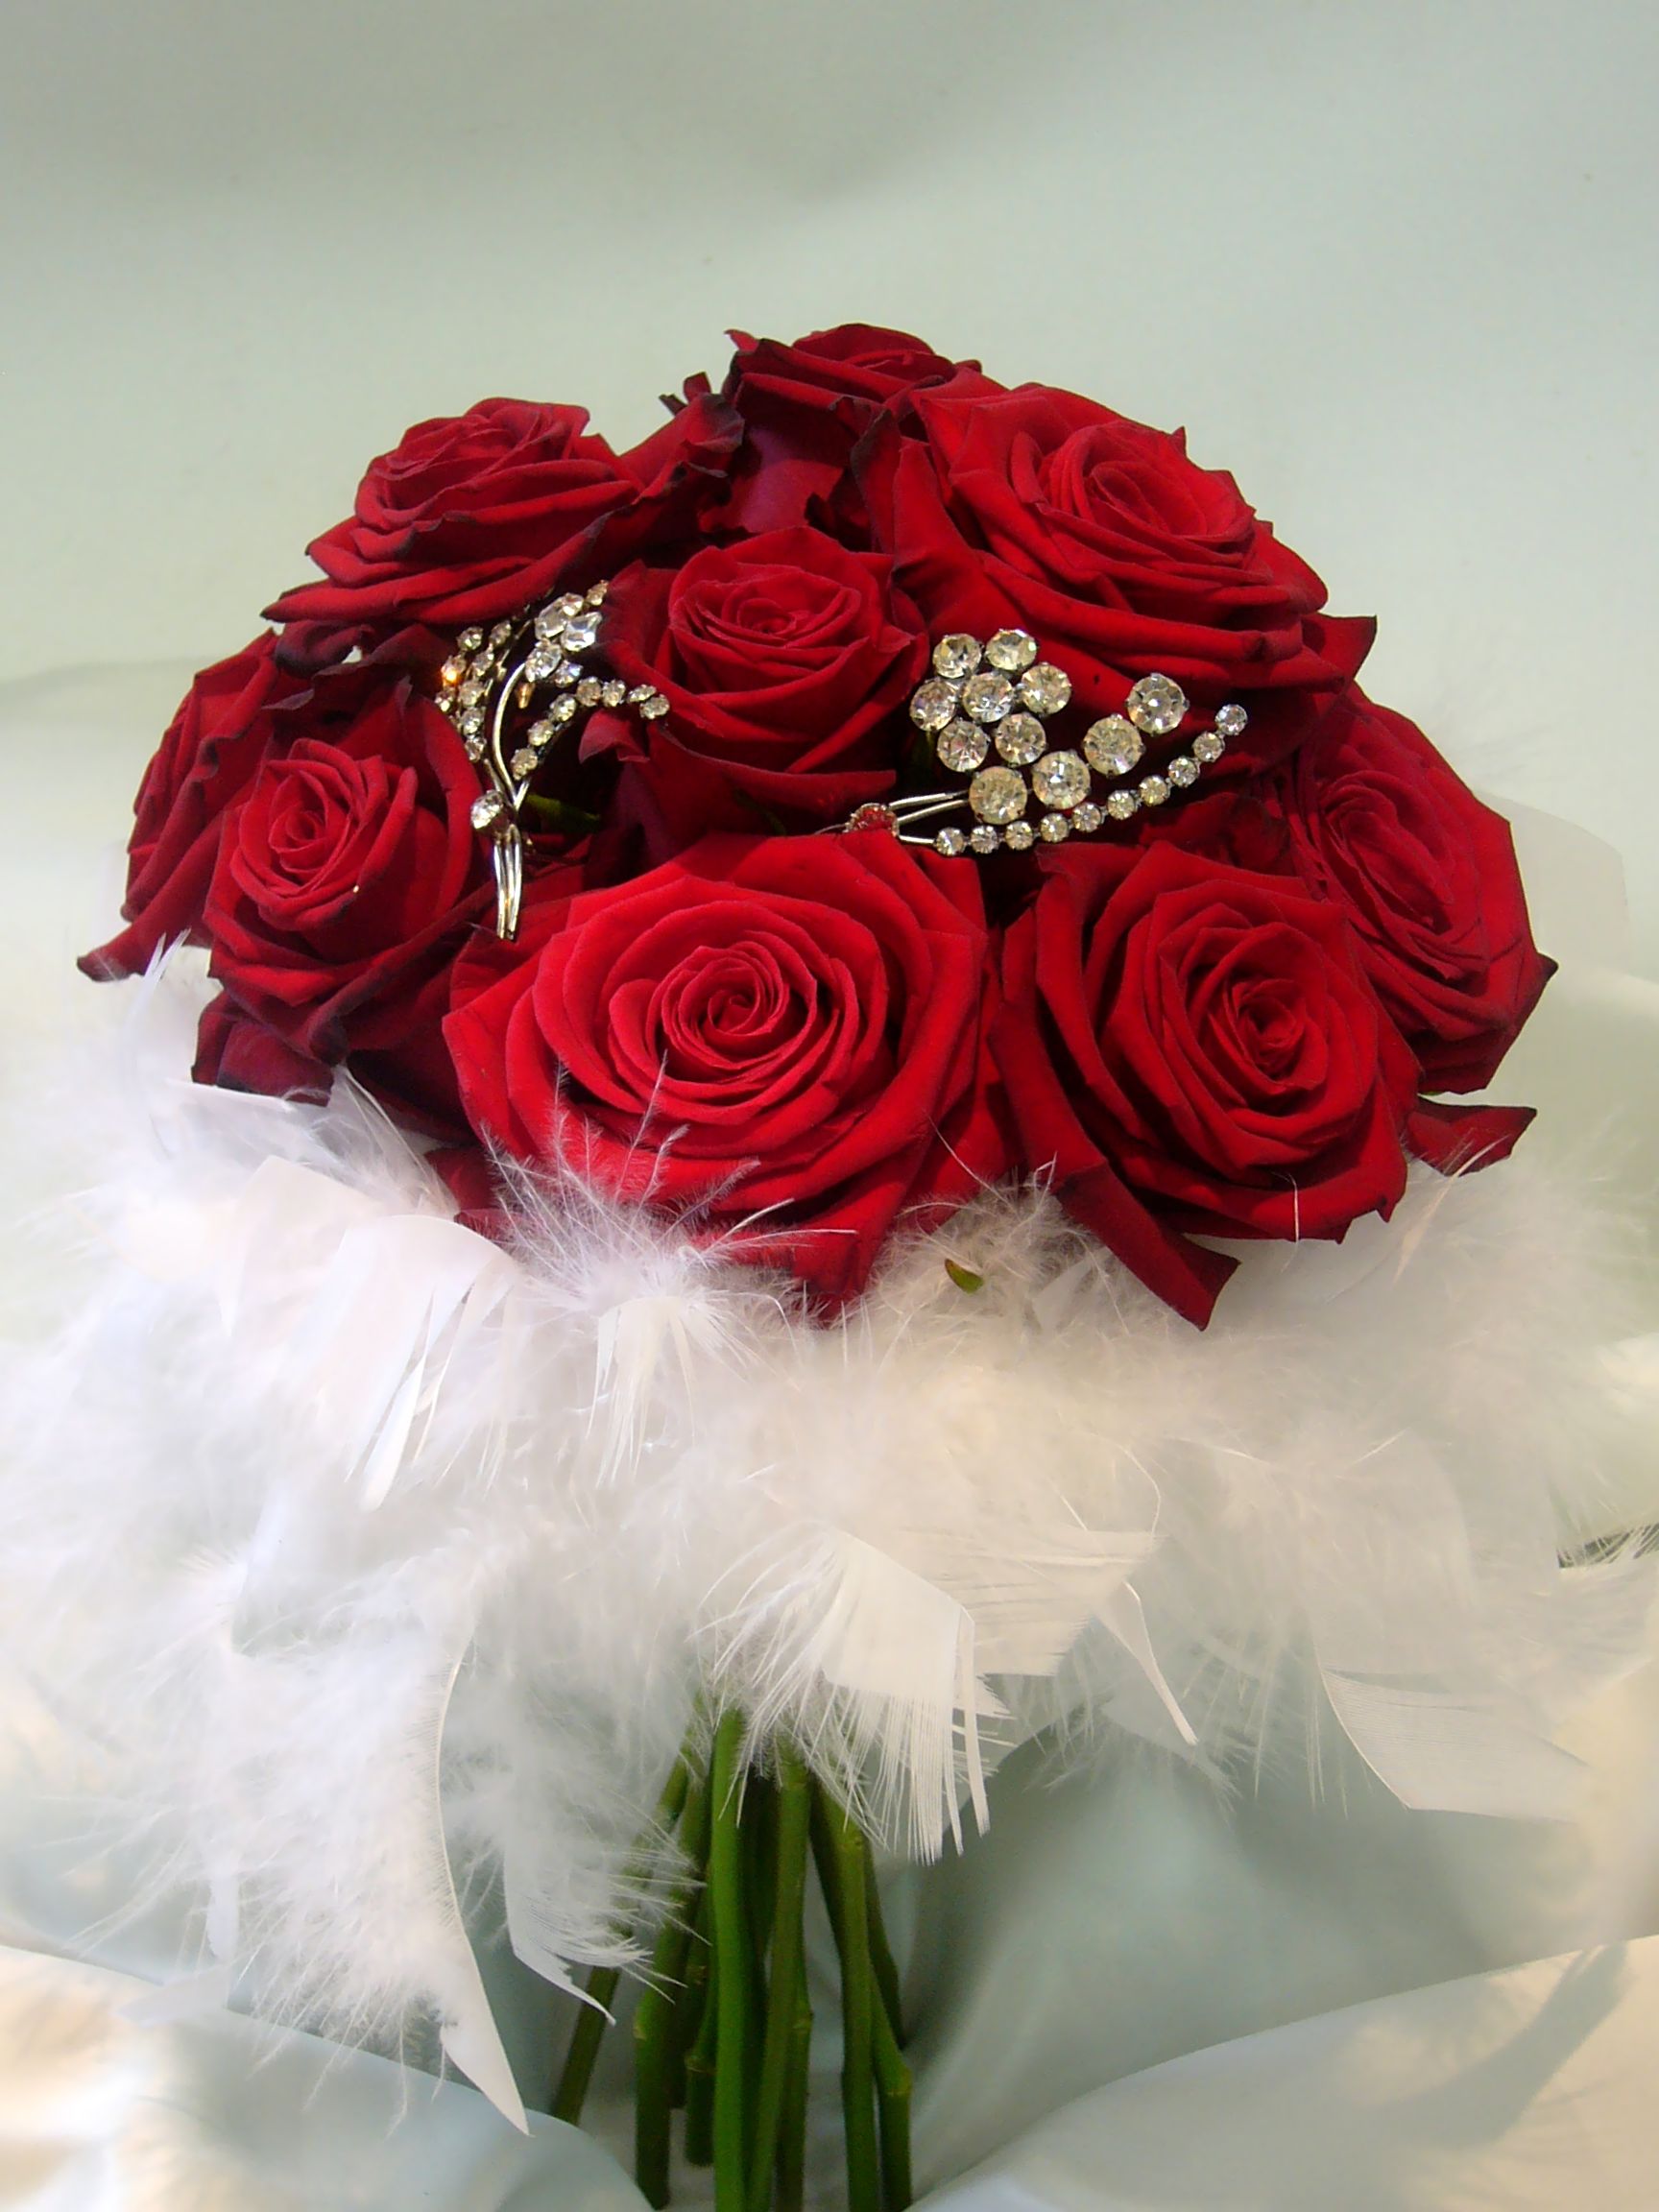 Wedding flowers with red